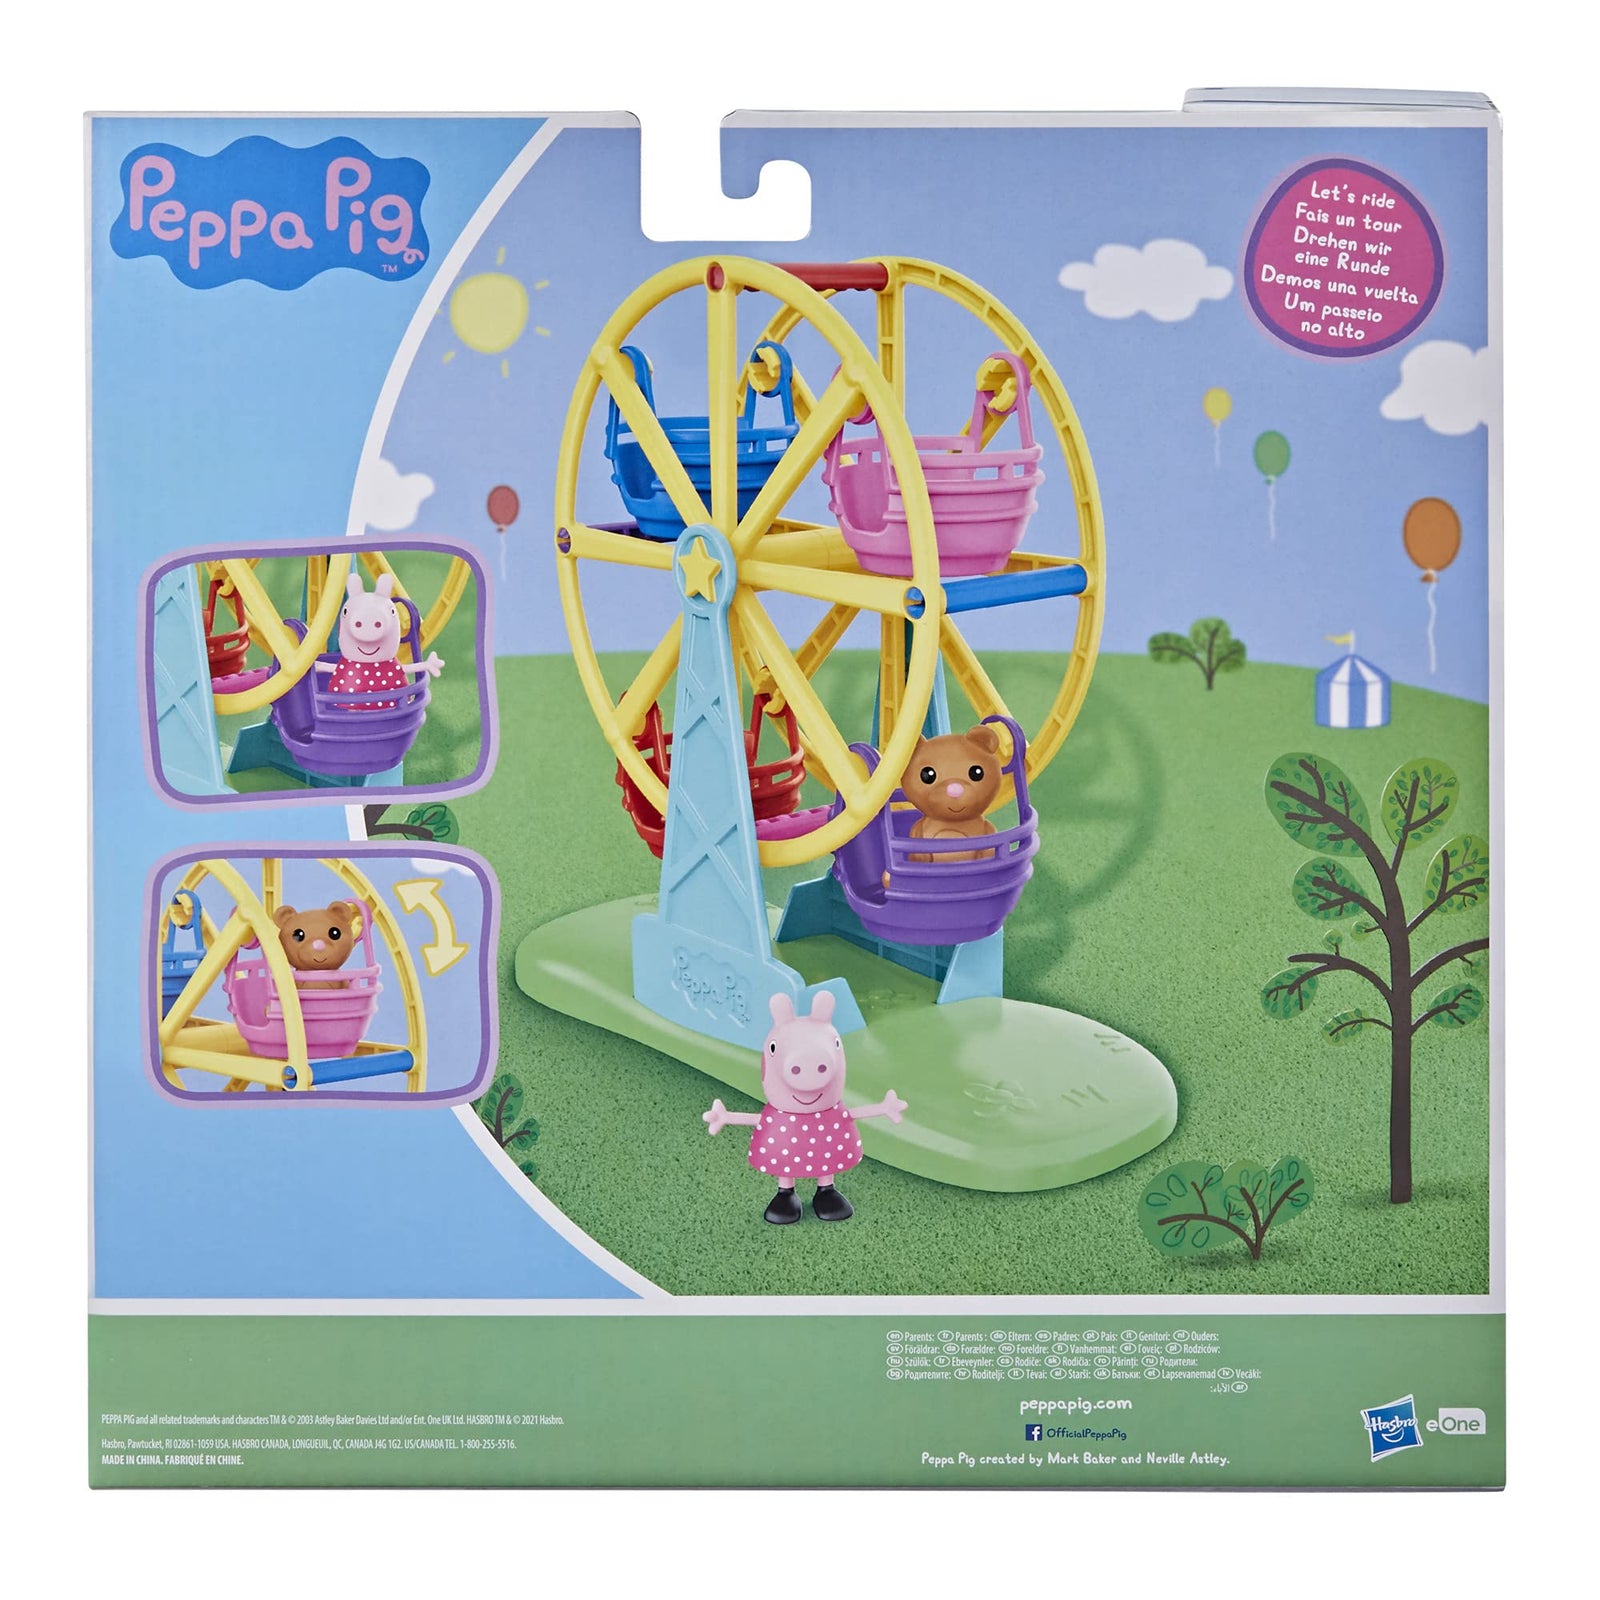 Hasbro Peppa Pig Peppa’s Adventures Peppa’s Ferris Wheel Playset Preschool Toy, with Peppa Pig Figure and Accessory for Kids Ages 3 and Up